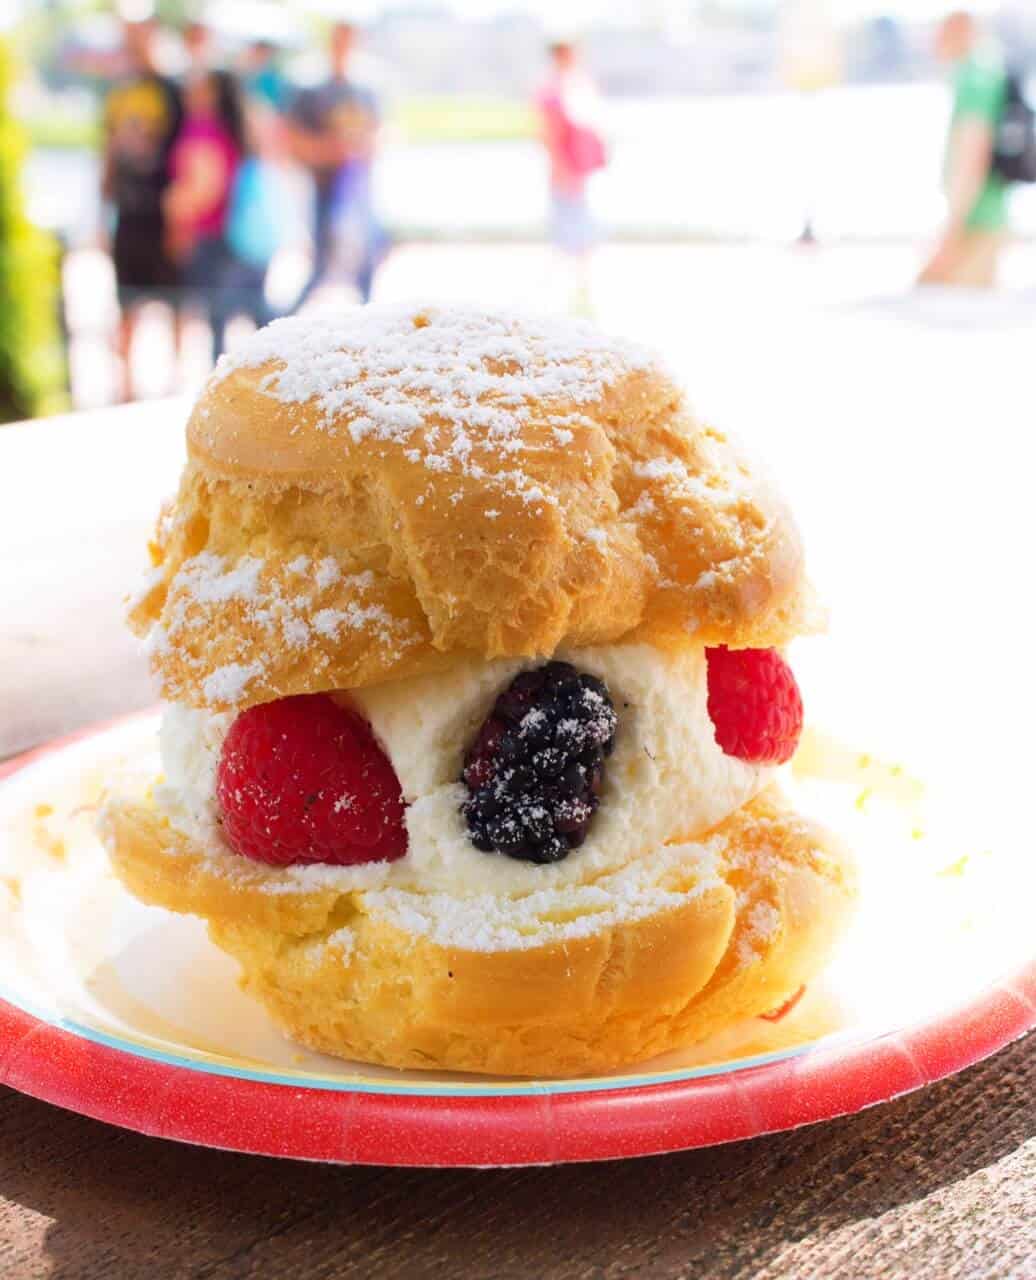 Berry Cream Puff from Kringle Bakery